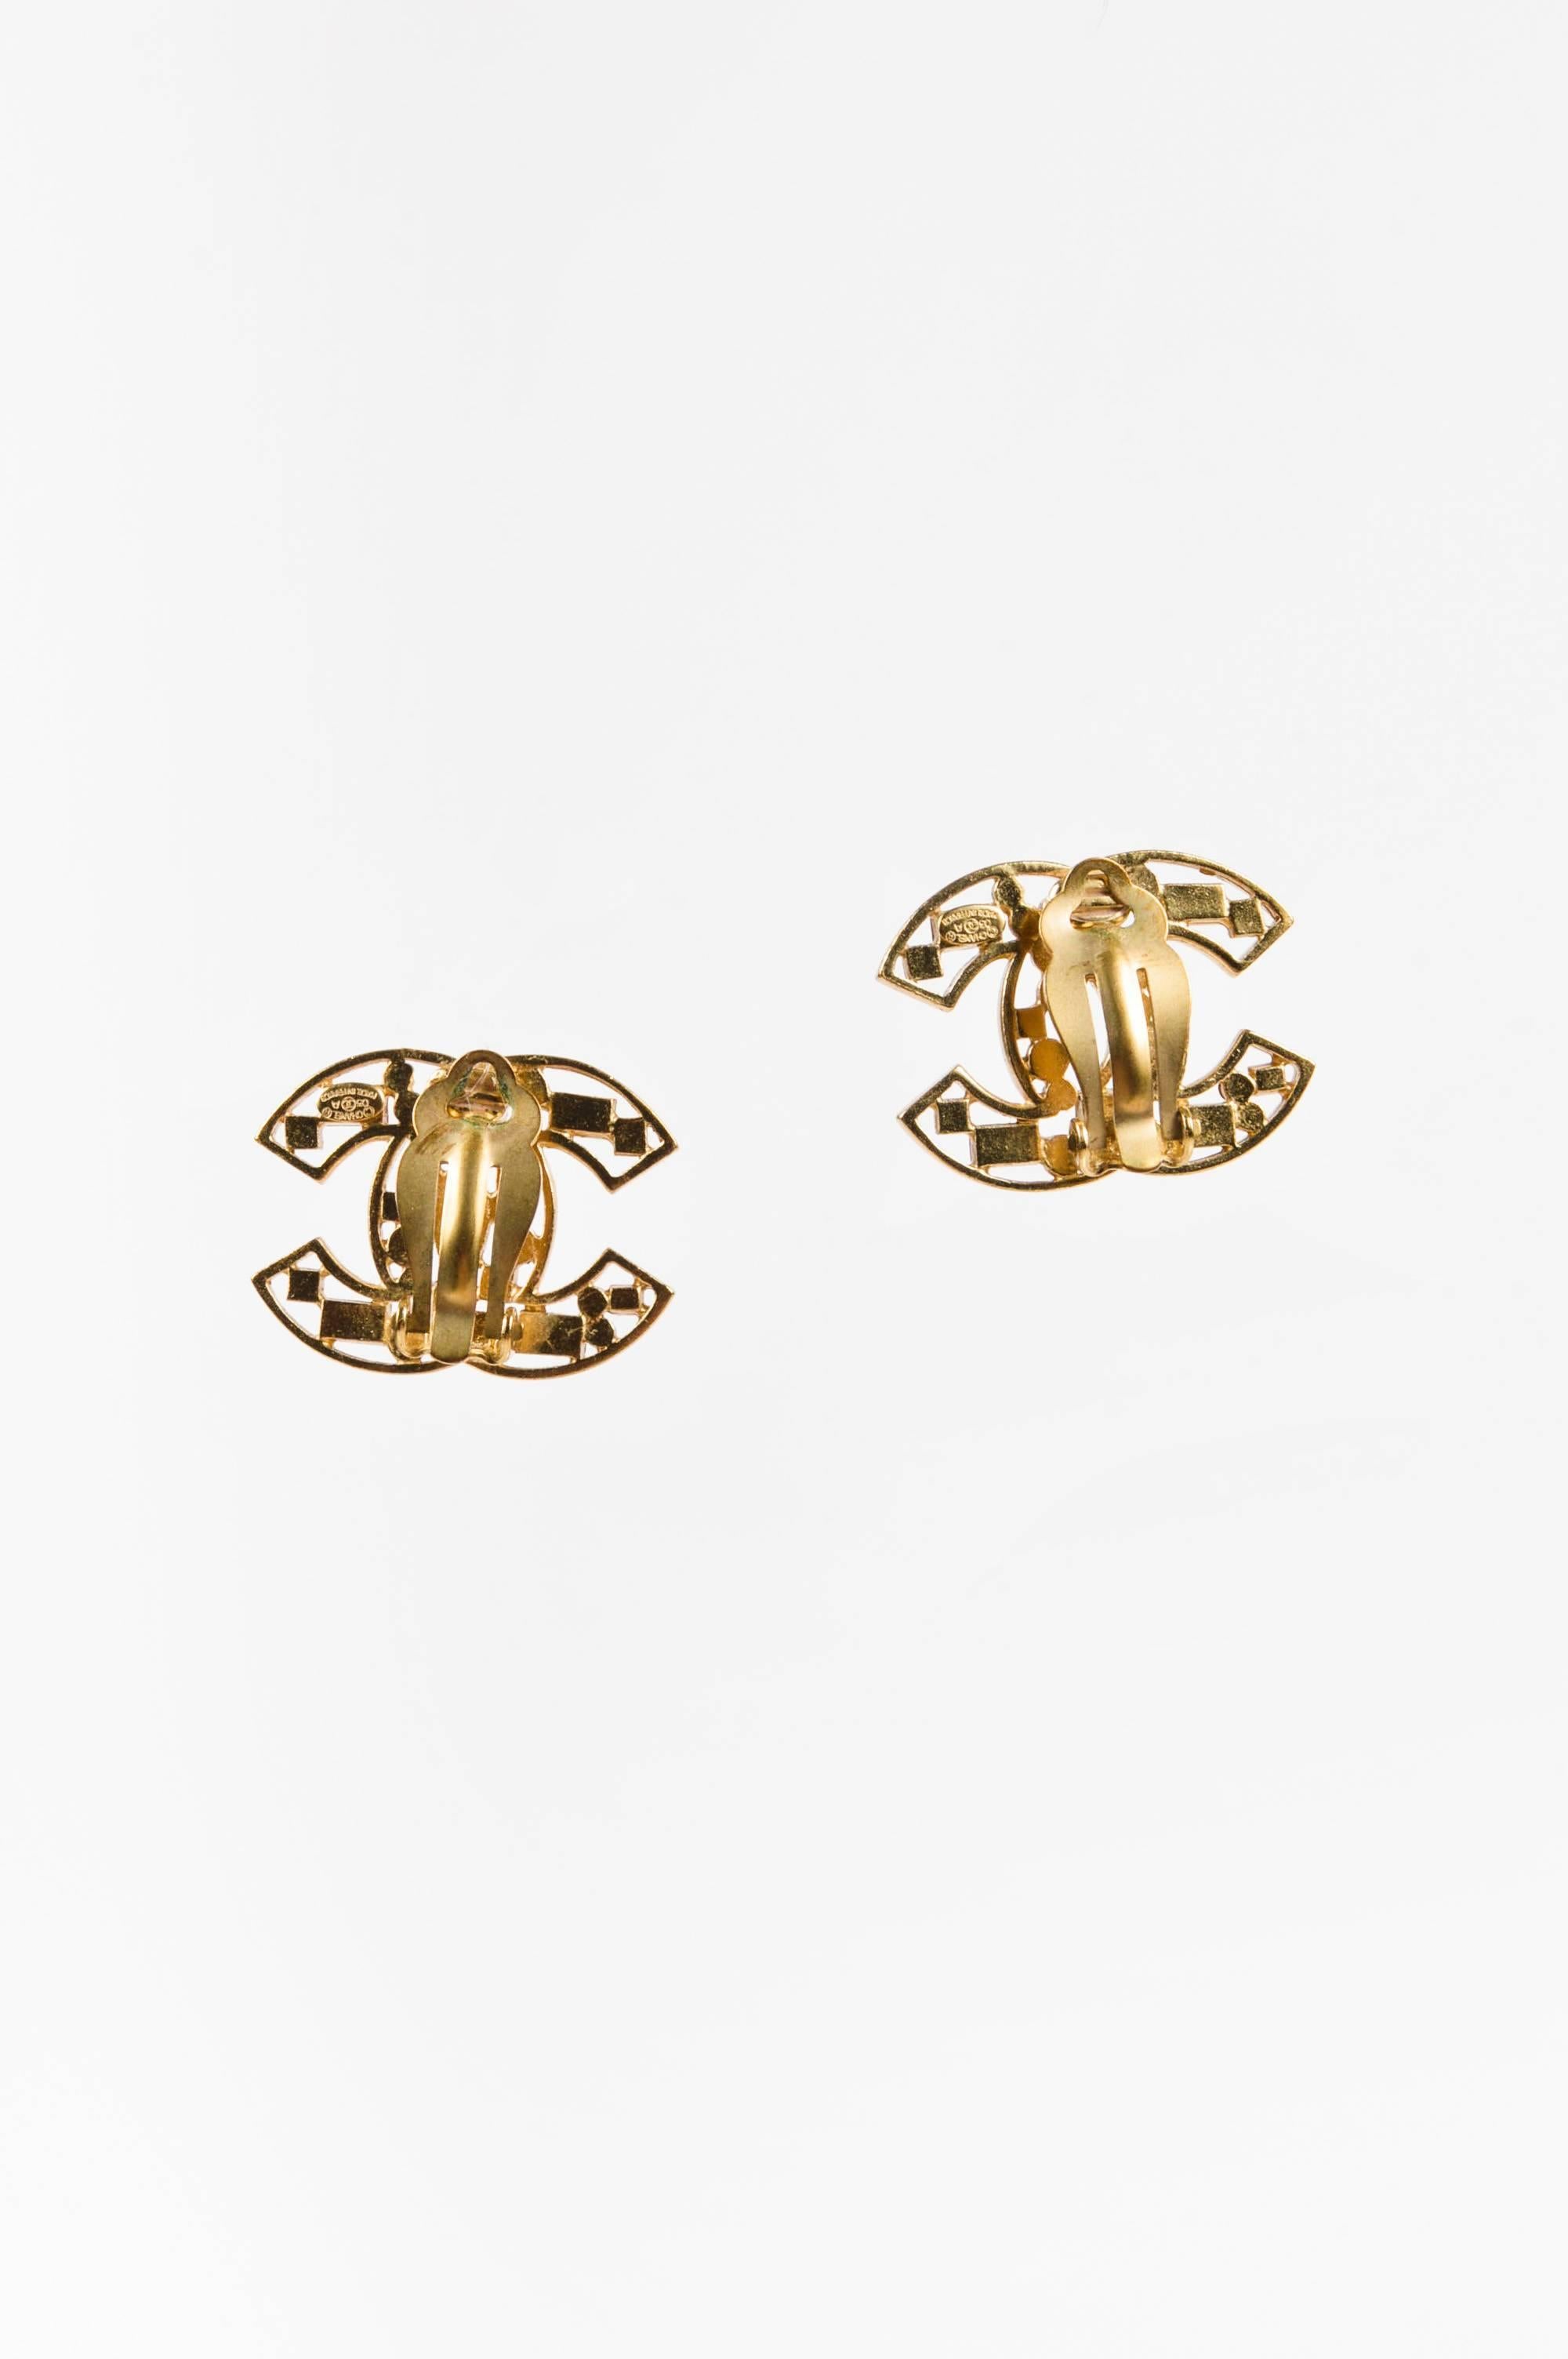 Earrings form the fall 2003 collection for everyday sophistication. Gold-tone metal construction. 'CC' shaped base with cut out detail. Mixed colored crystal embellishment. Back hinge clip-on closure.

Additional Measurements:
Total Height: 23